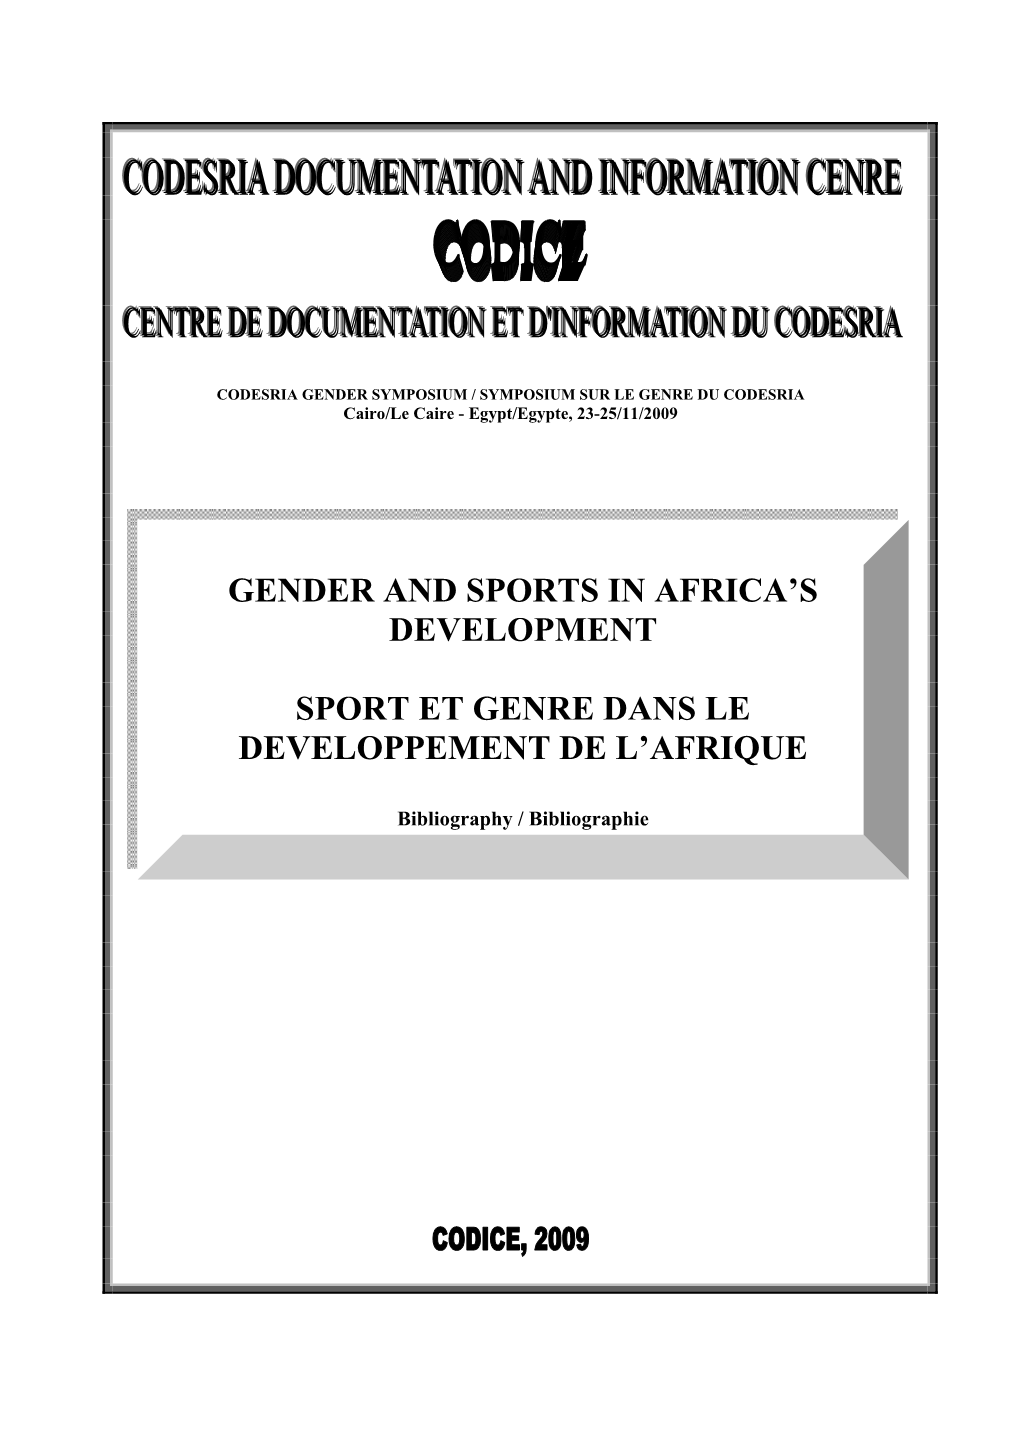 Gender and Sports in Africa's Development